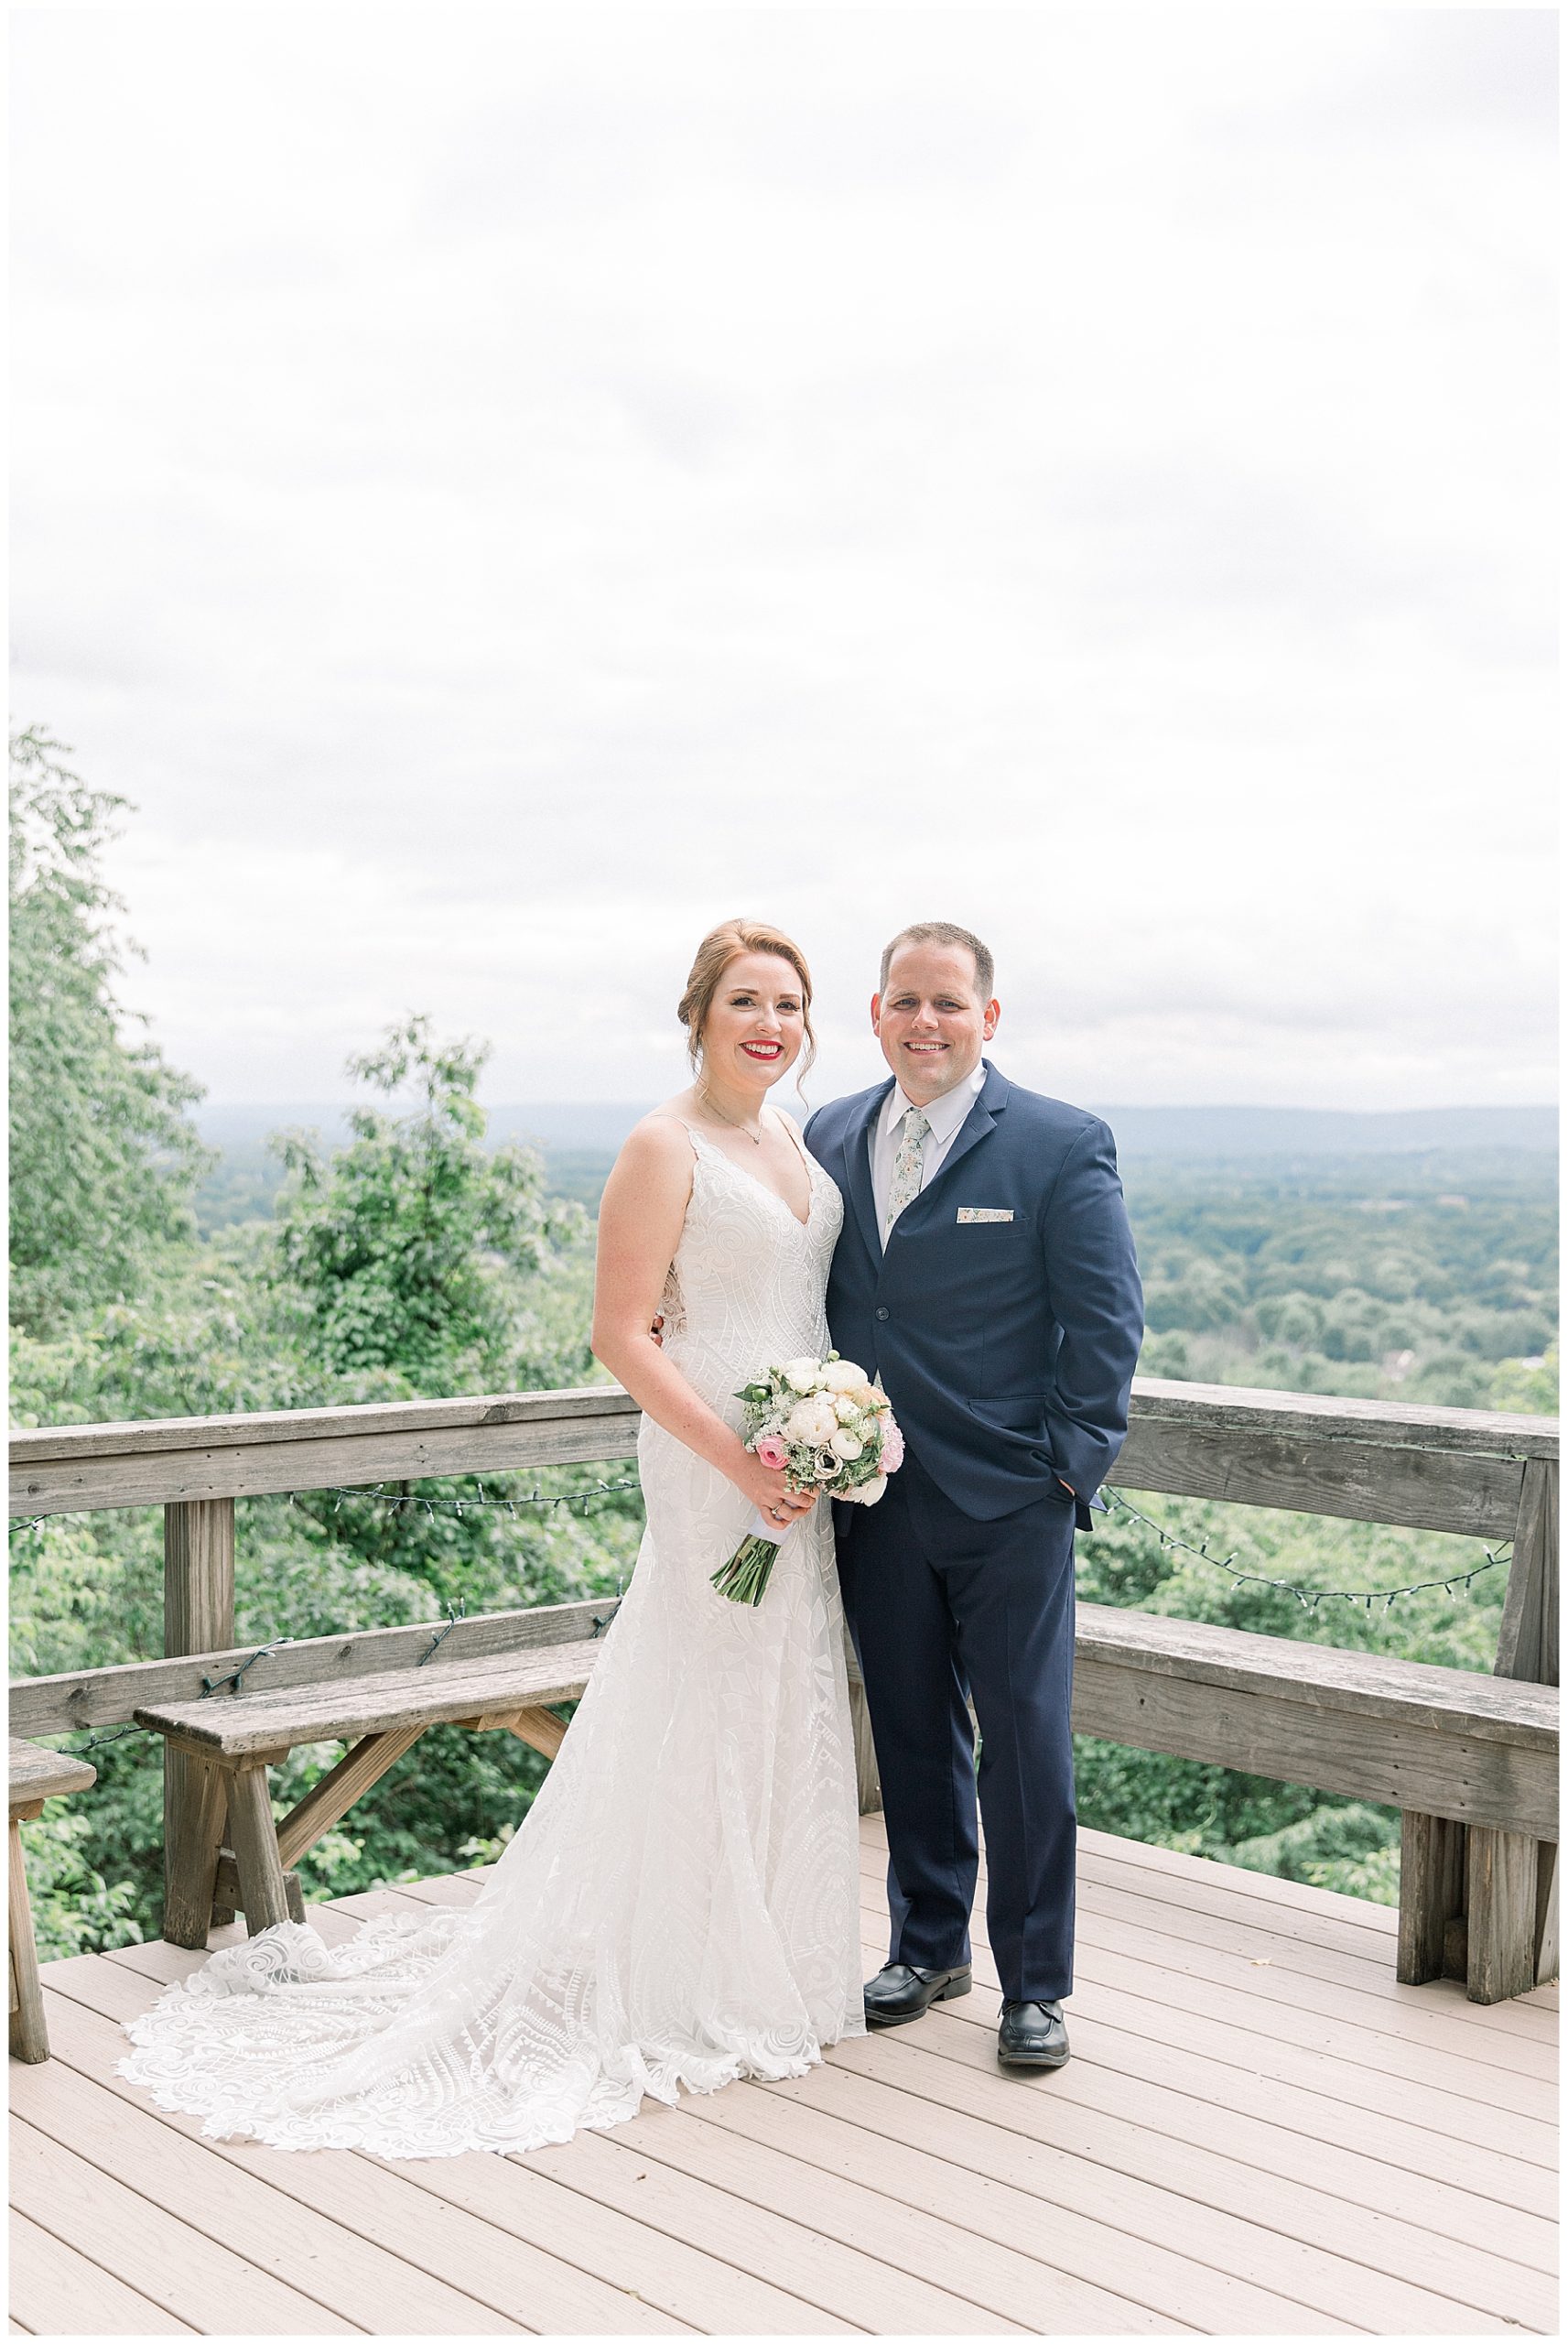 Bride + Groom share intimate moment together during Rogers Orchard Connecticut Wedding captured by Stephanie Berenson Photography